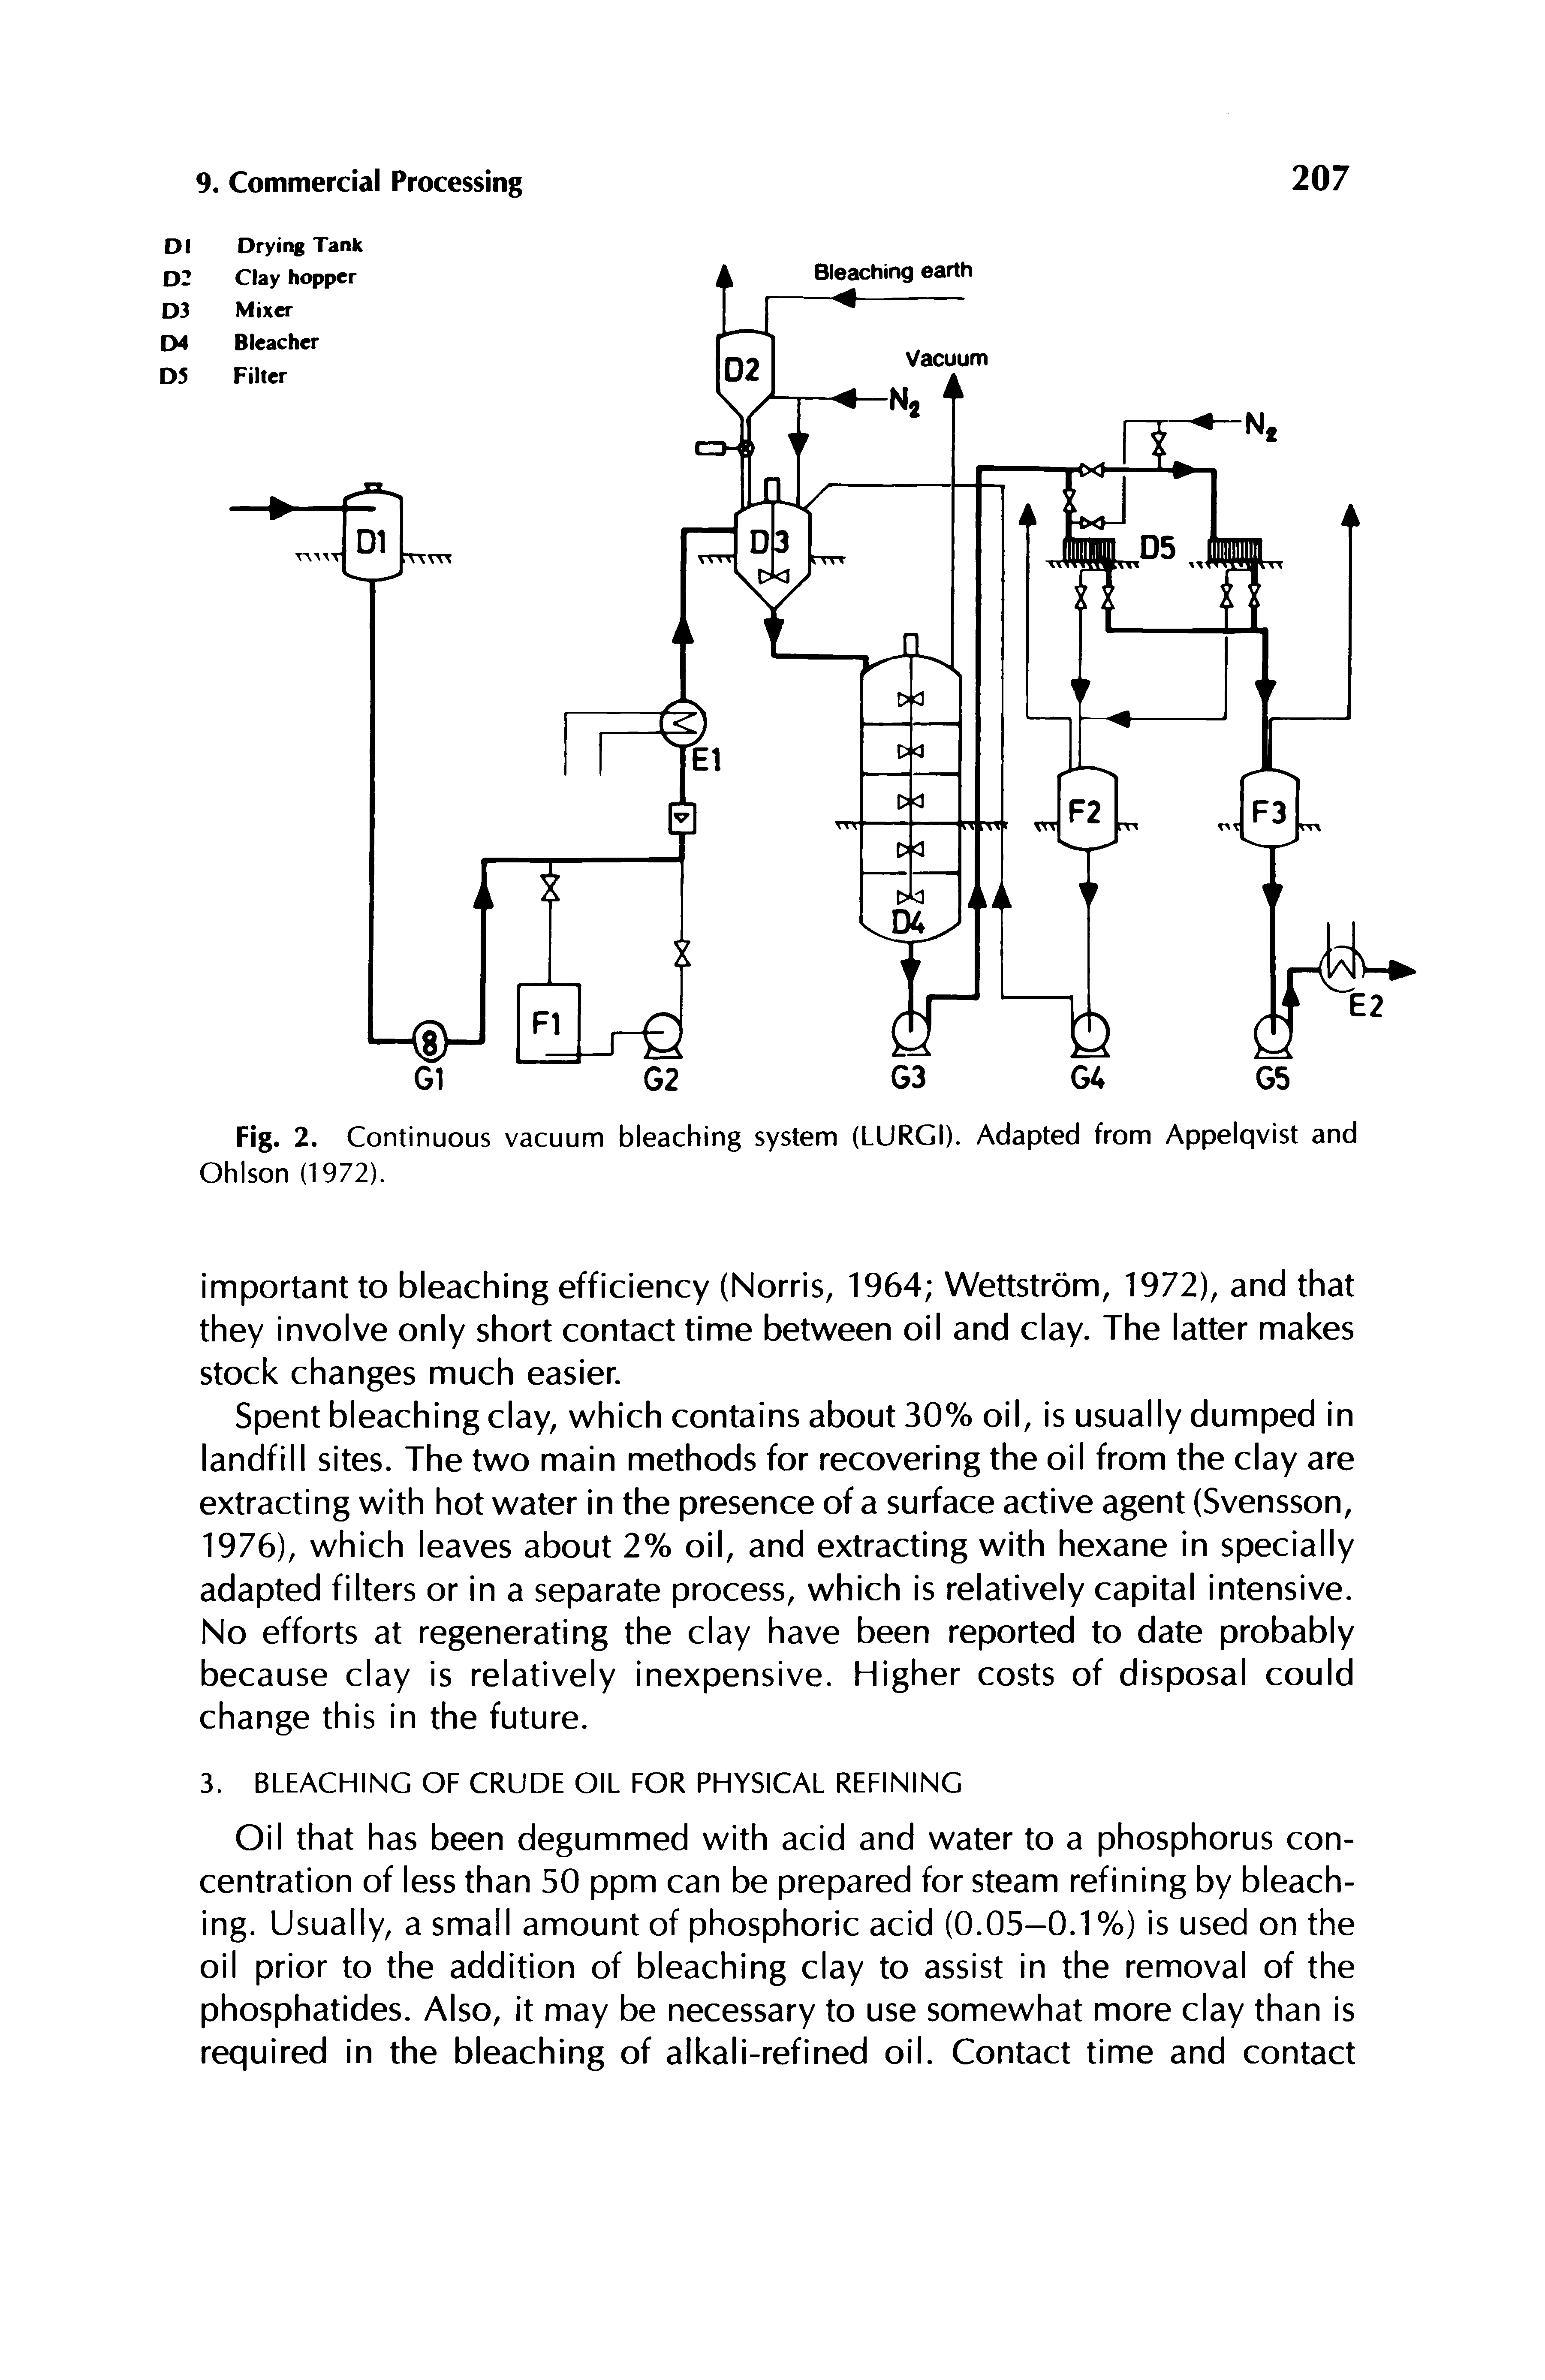 Fig. 2. Continuous vacuum bleaching system (LURGI). Adapted from Appelqvist and Ohison (1972).